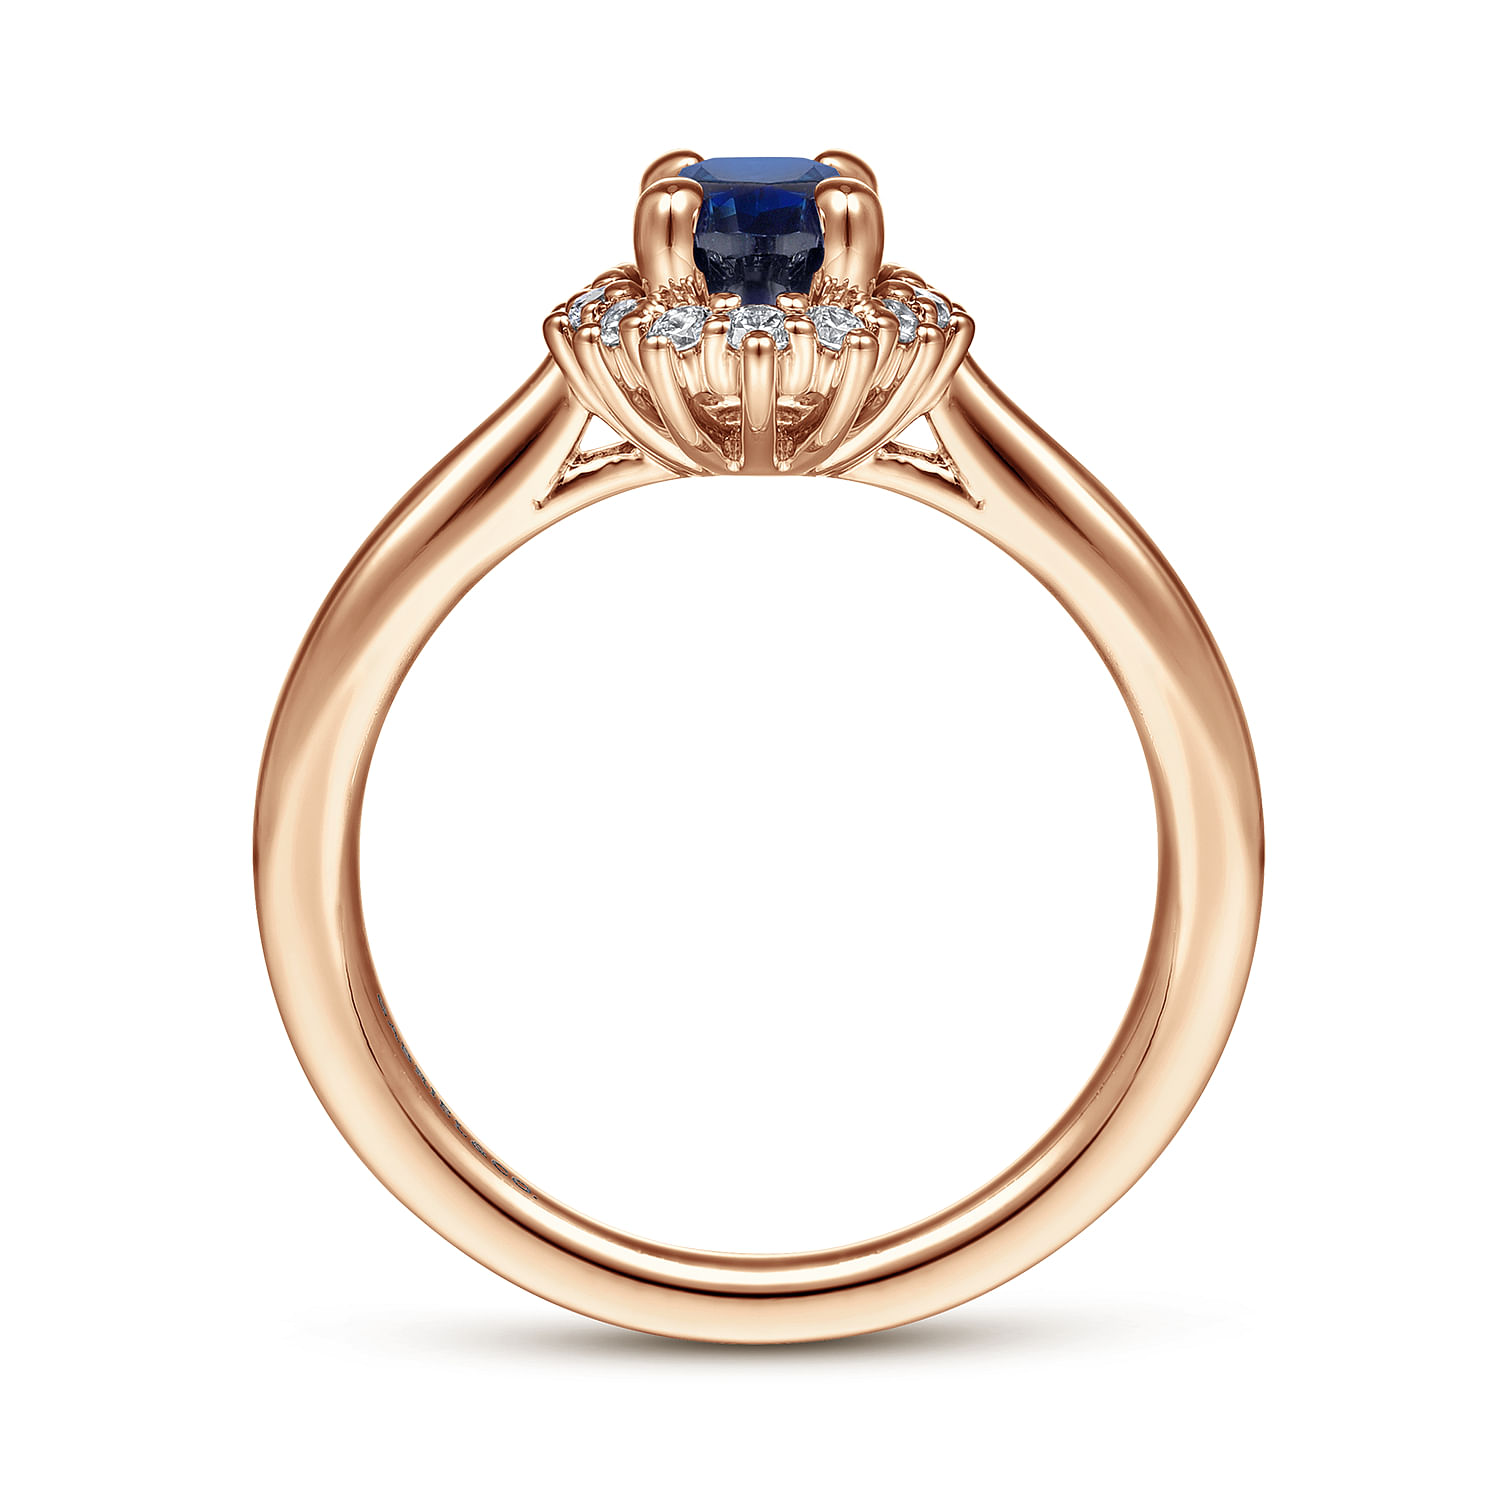 Fergie - 14K Rose Gold Oval Halo Diamond and Sapphire Engagement Ring - 0.17 ct - Shot 2